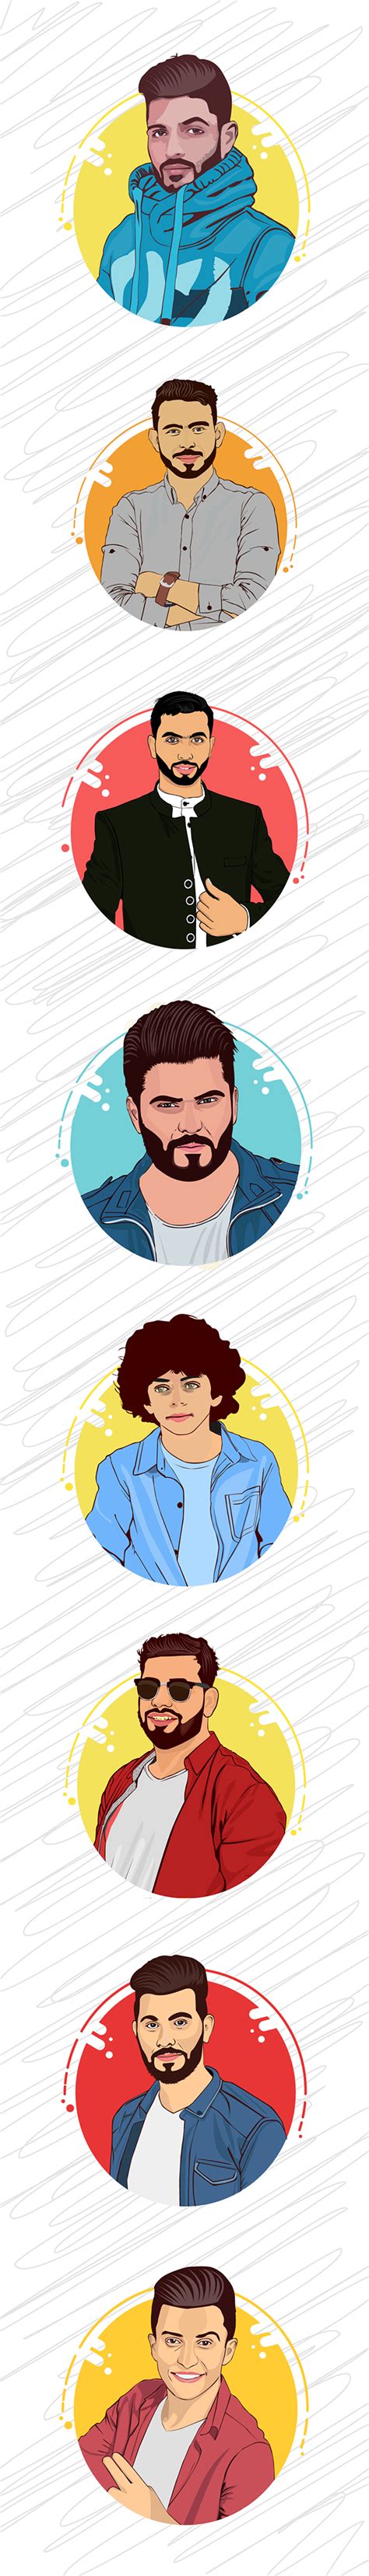 Centimeter (cm) is also a set of unit that. Vector art || convert pixel photo to vector . on Behance